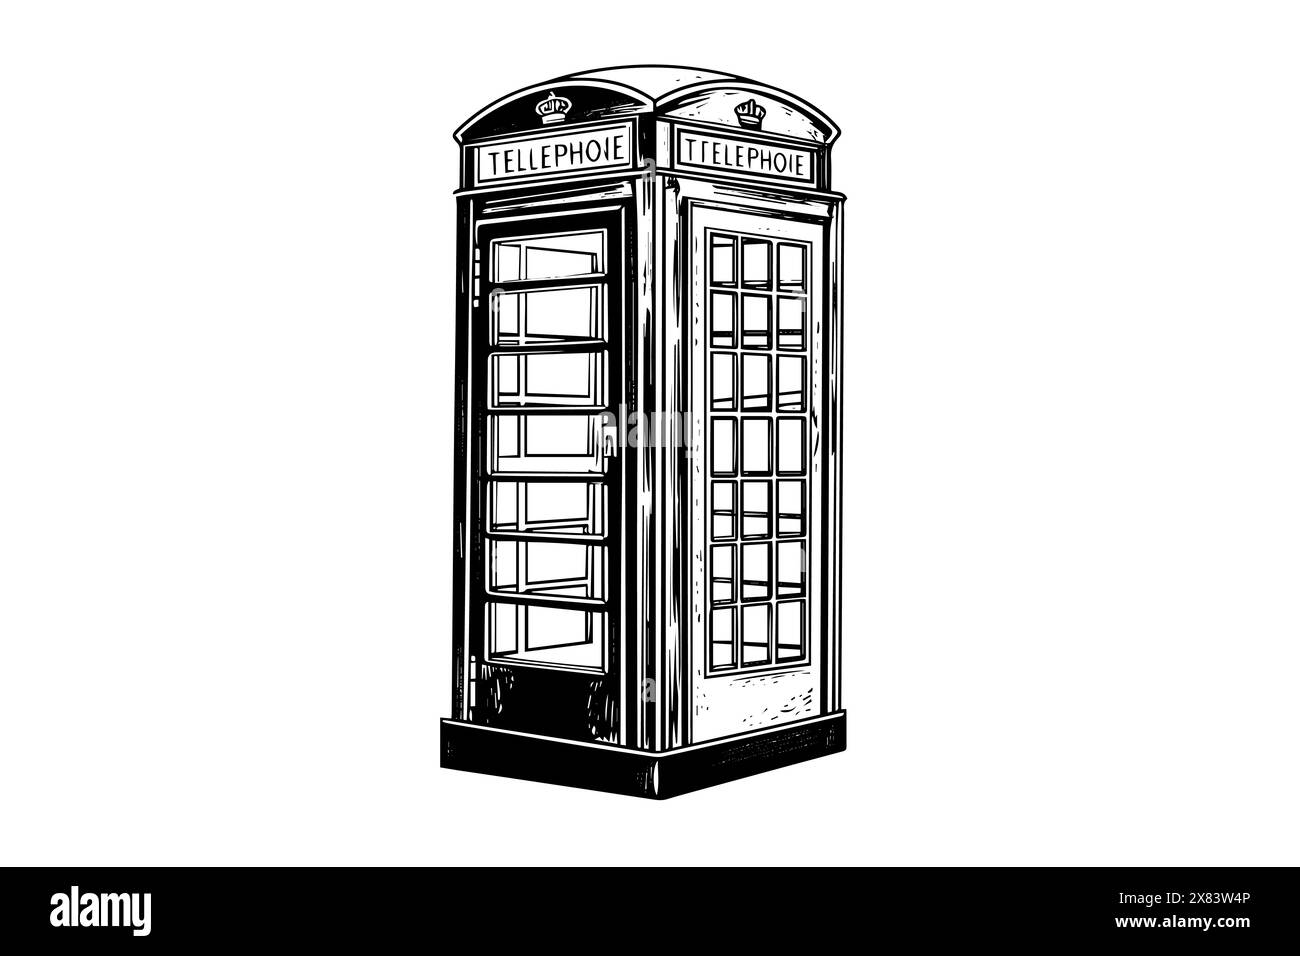 Retro phone box in engraved style vector illustration. Hand drawn ink sketch. Stock Vector